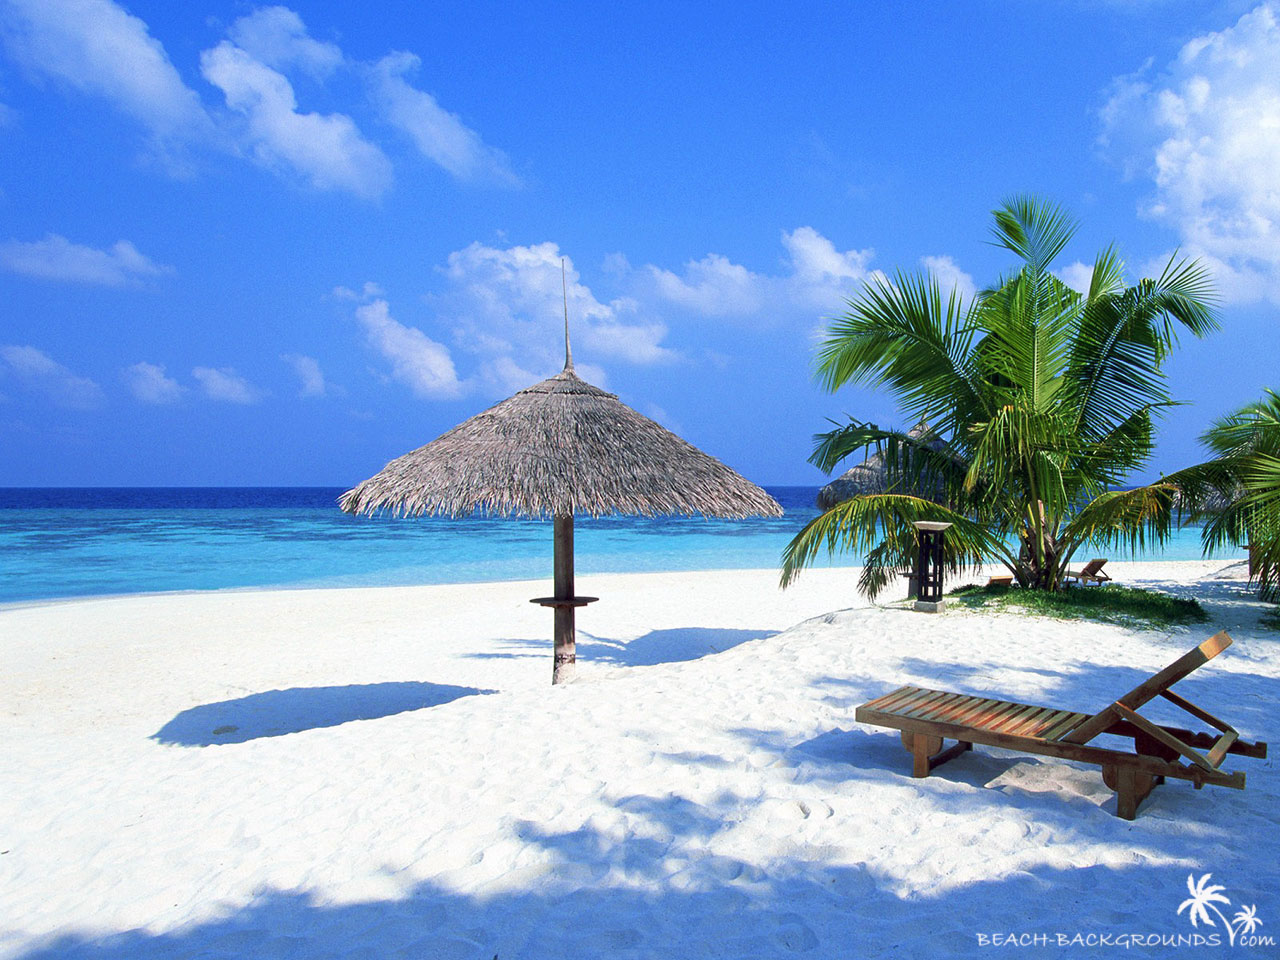 Beautiful tropical beach photos   Just for Sharing